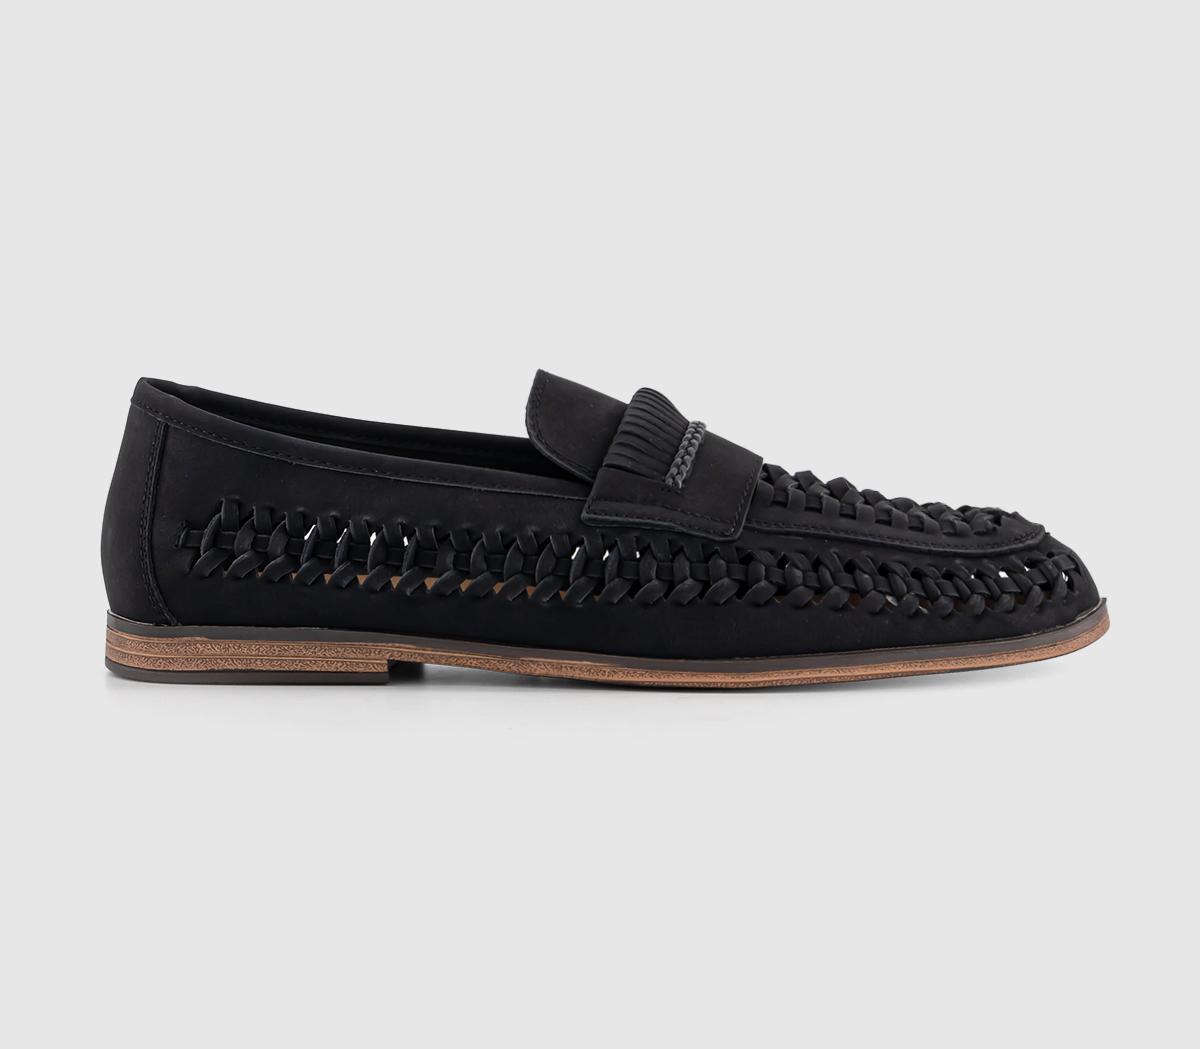 OFFICECrown Woven LoafersBlack